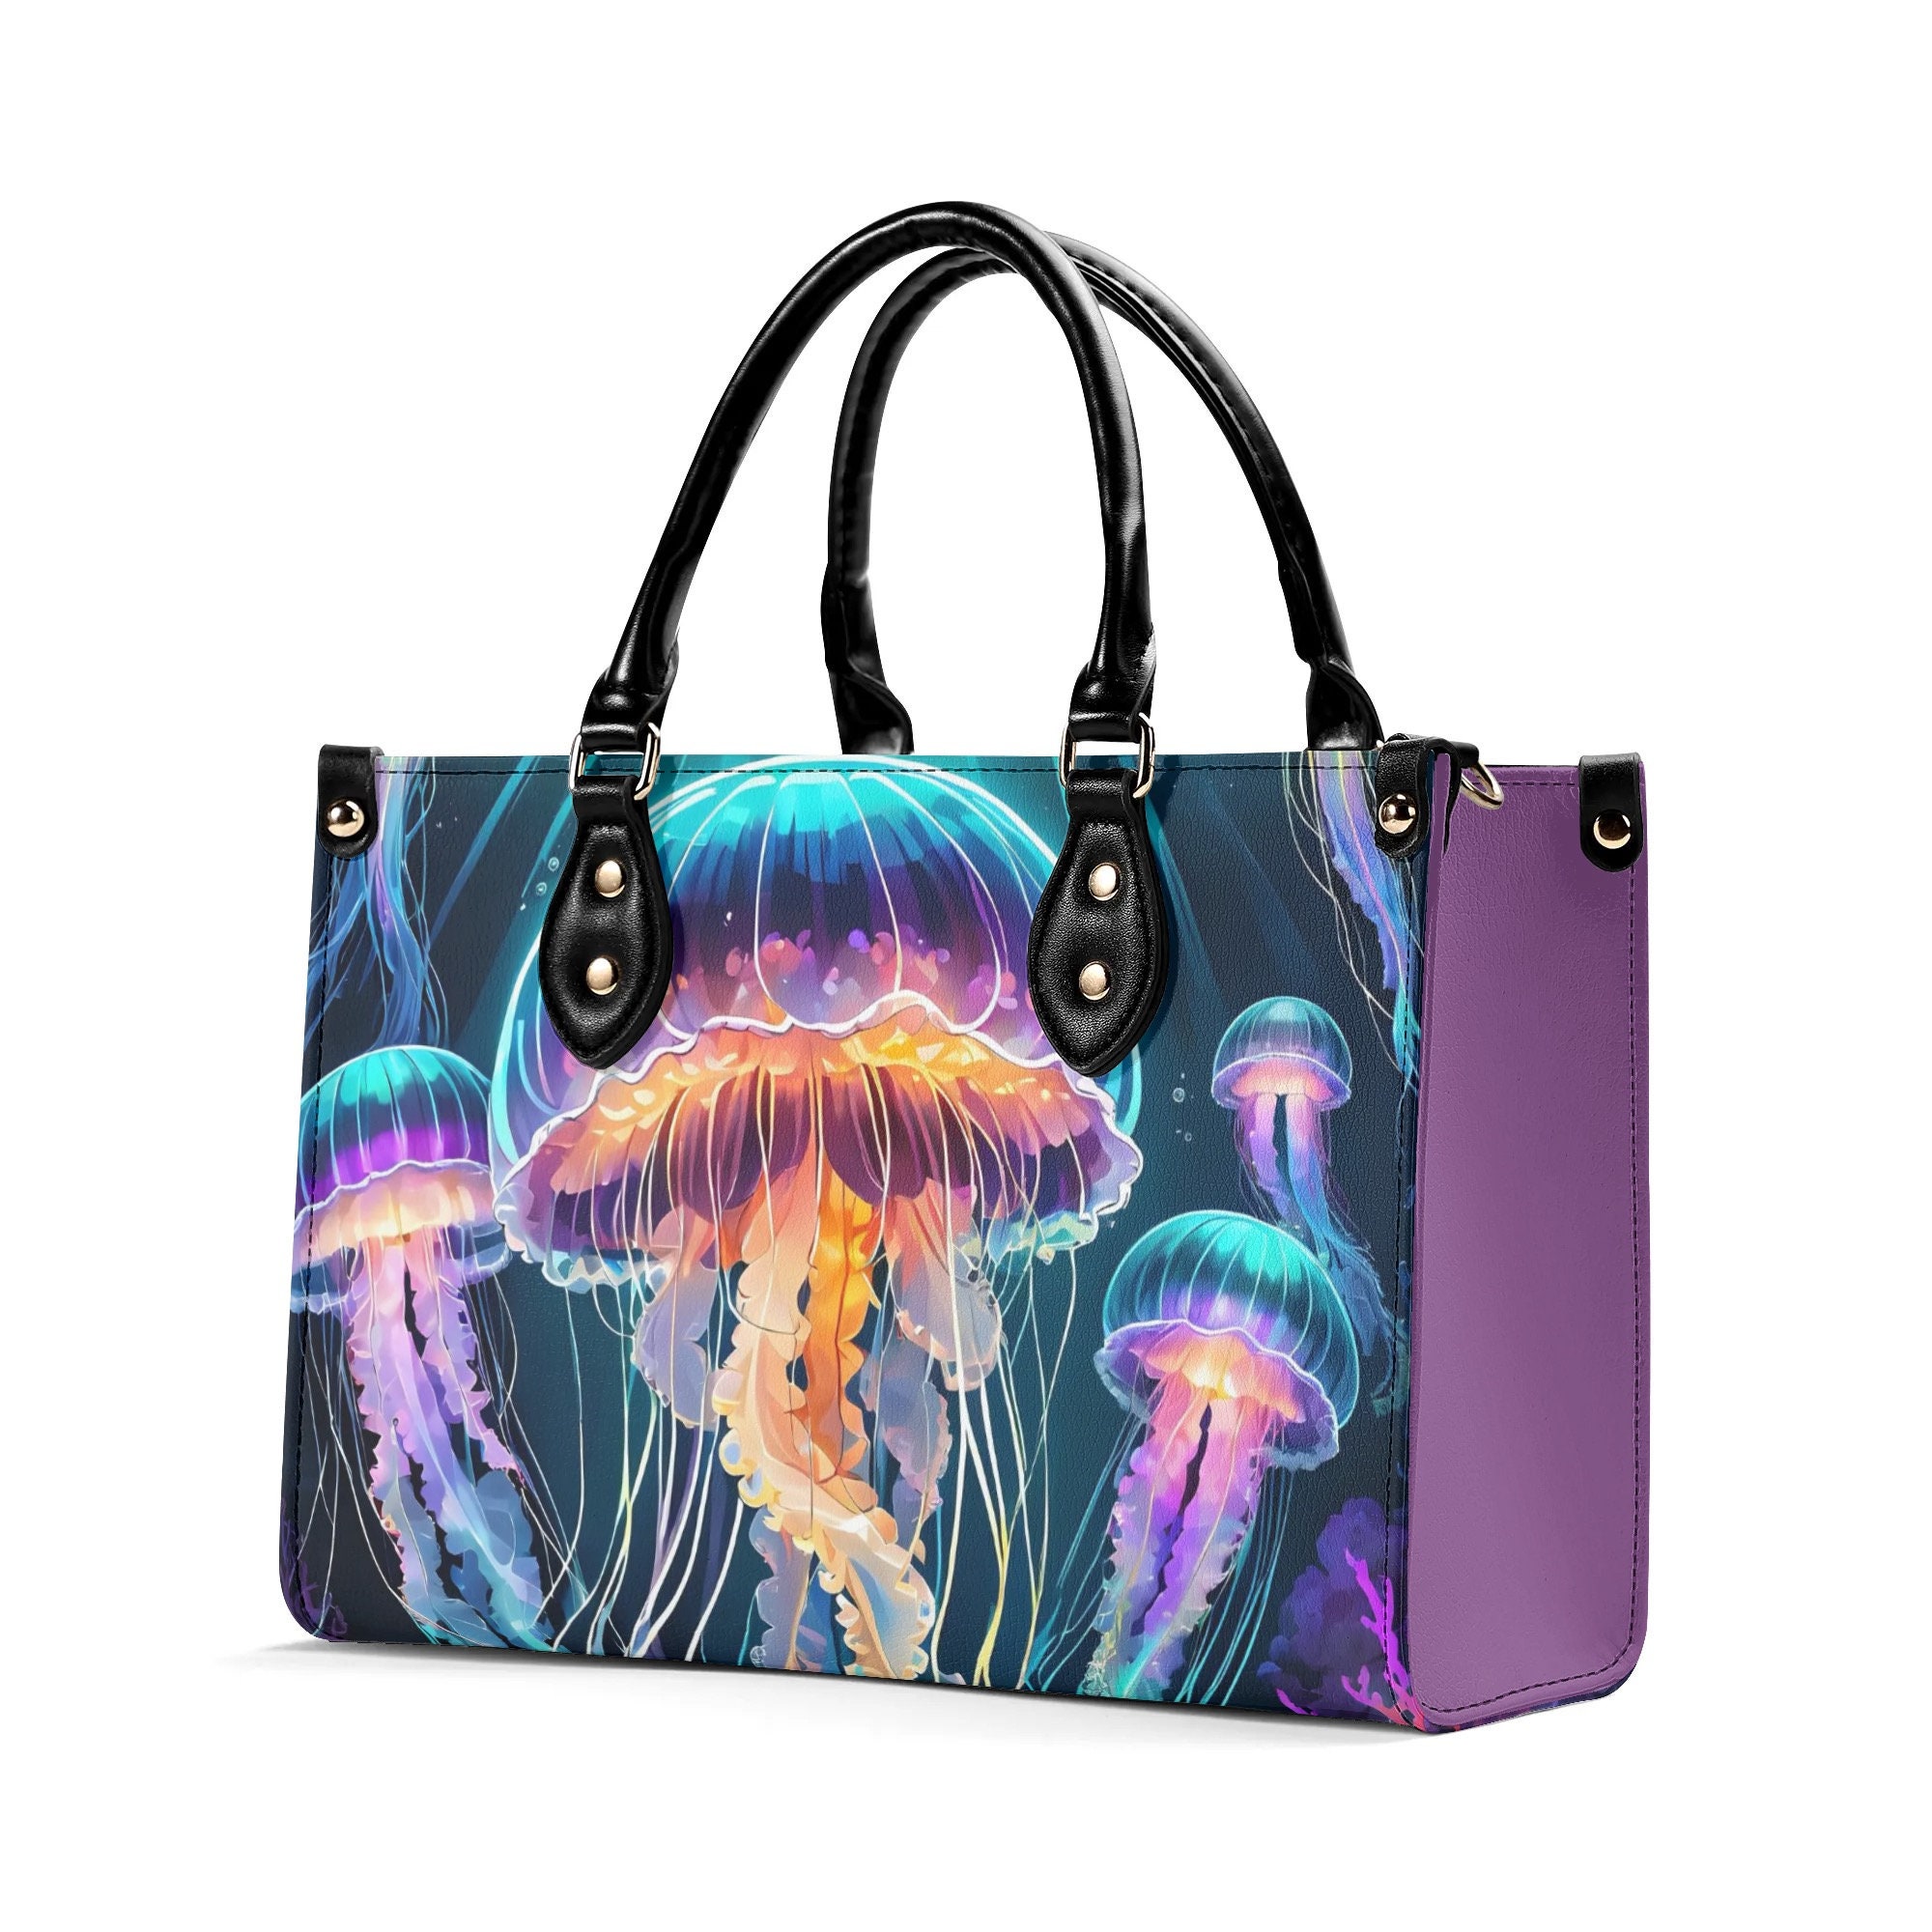 Jellyfish Leather Bags, Animal lover Gift